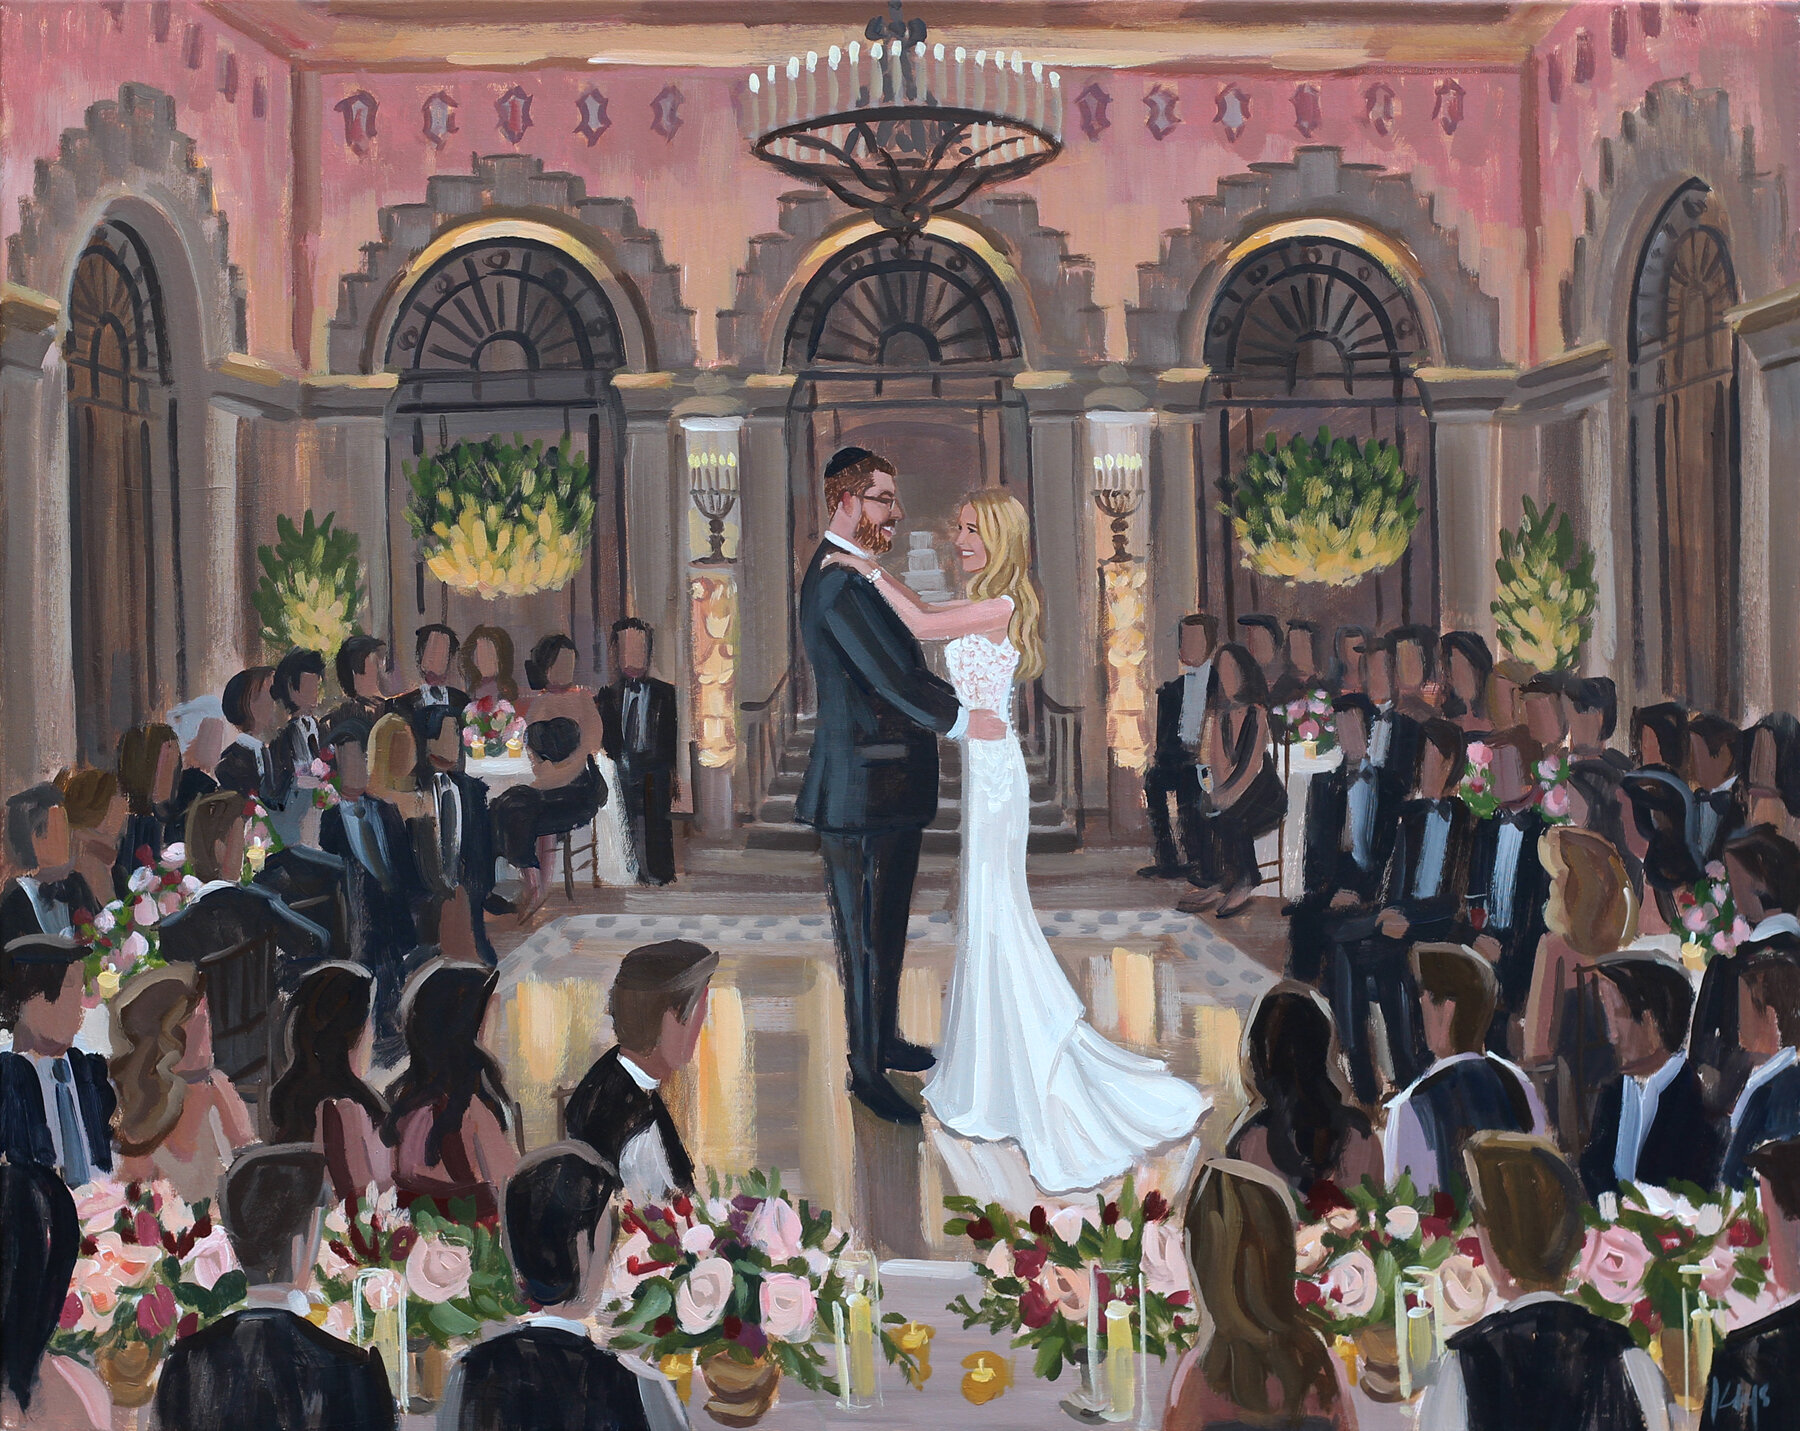 Live Wedding Painter, Ben Keys, captured Michelle + Merick’s First Dance during their reception hosted at the gorgeous, historic Flagler Museum in Palm Beach, FL.